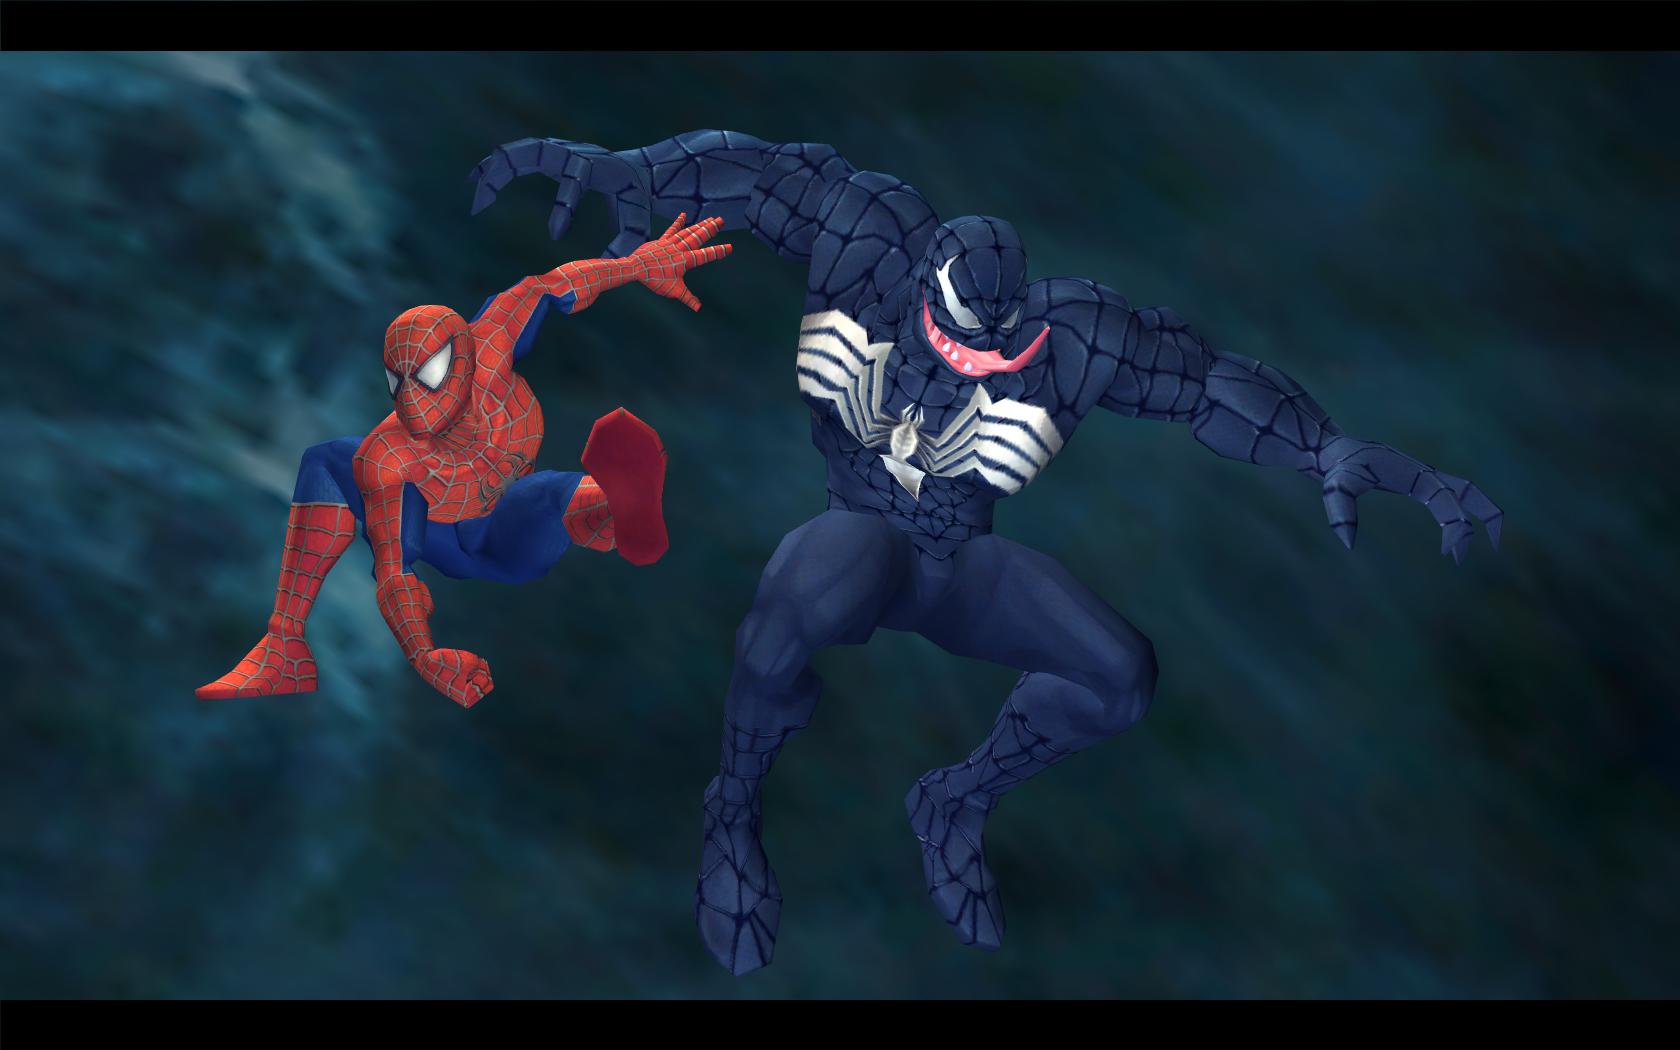 Spider man friend or foe characters